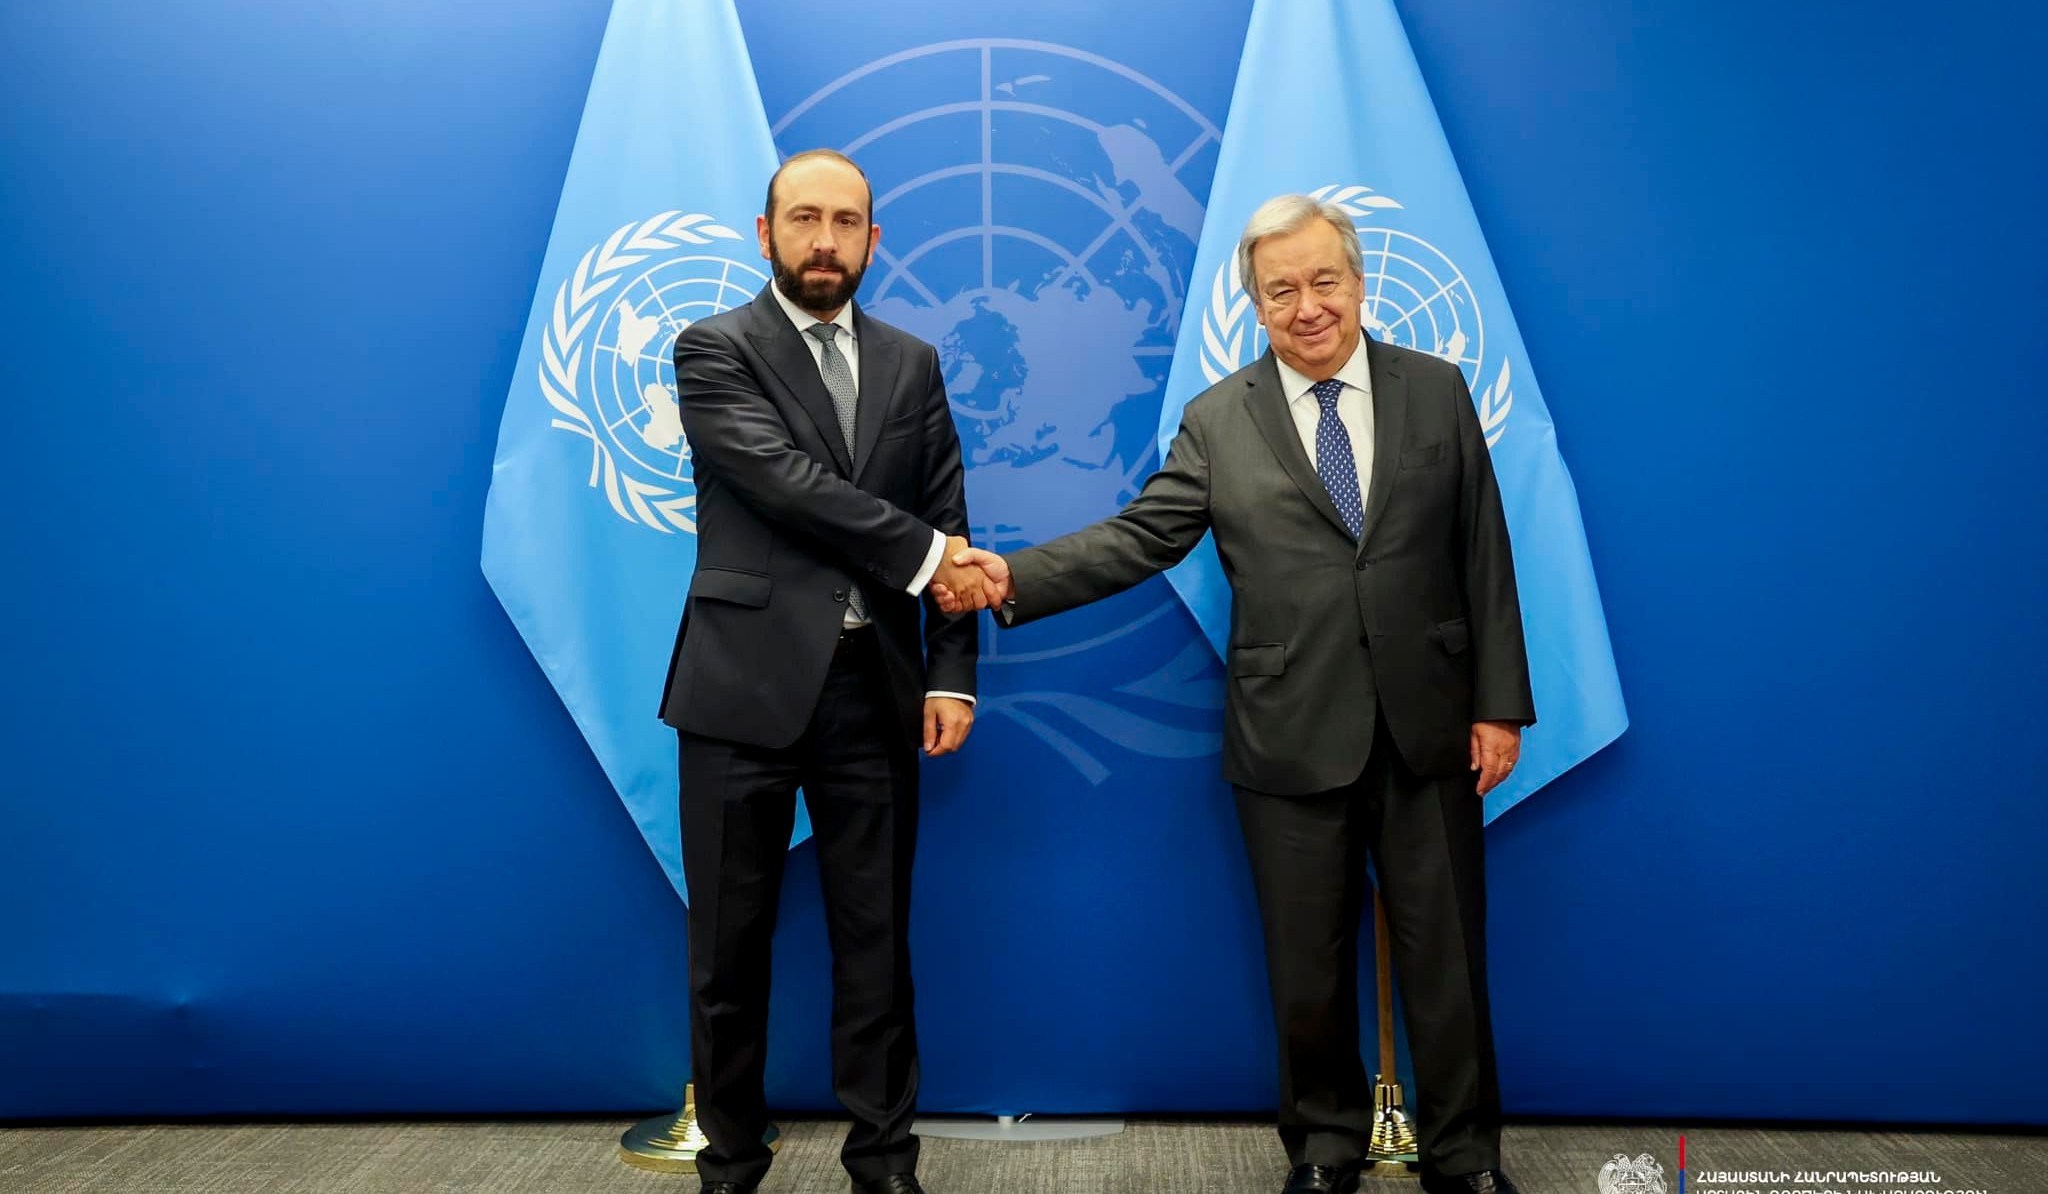 Foreign Minister of Armenia met with UN Secretary General